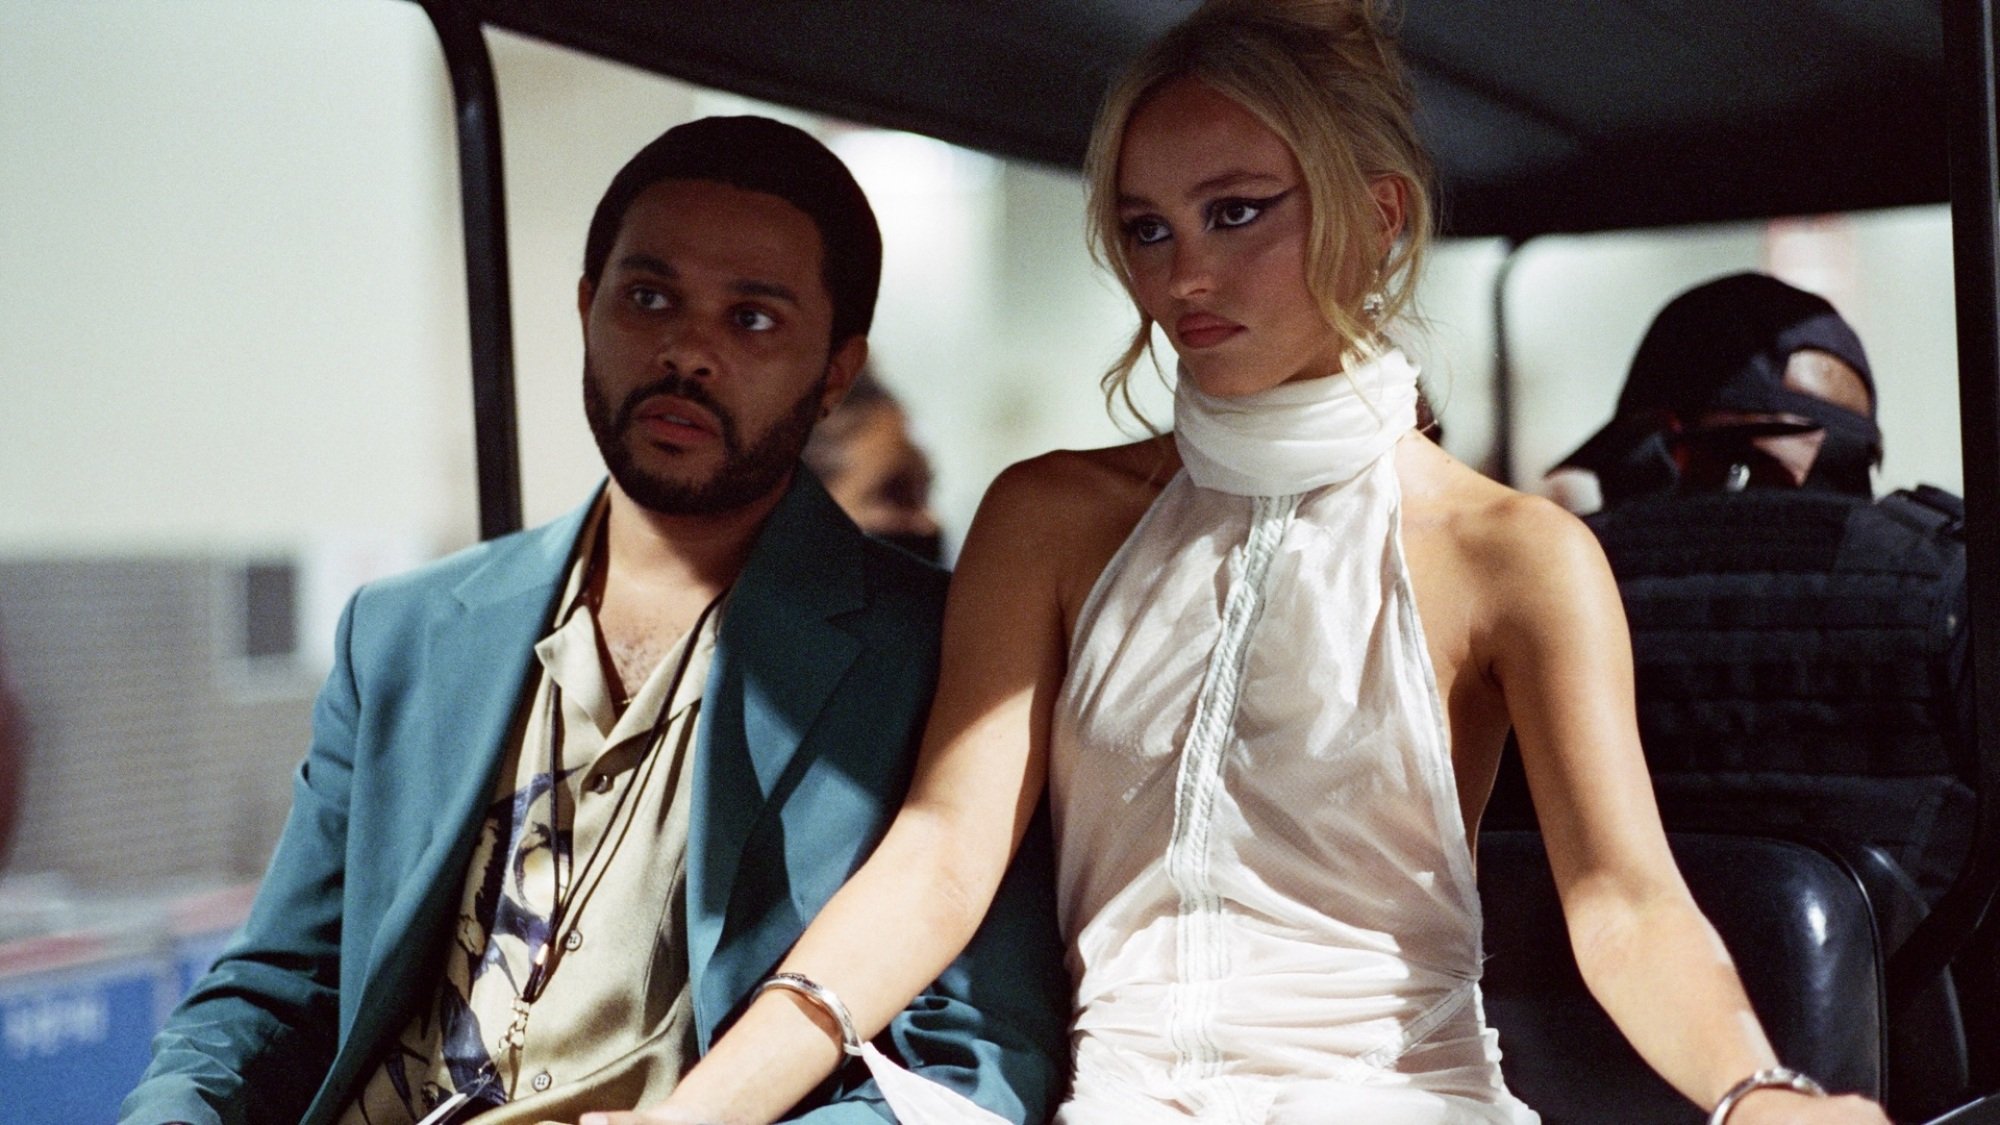 A man in a blue suit and a woman in a white dress hold hands in the backseat of a golf cart riding through a white hallway.